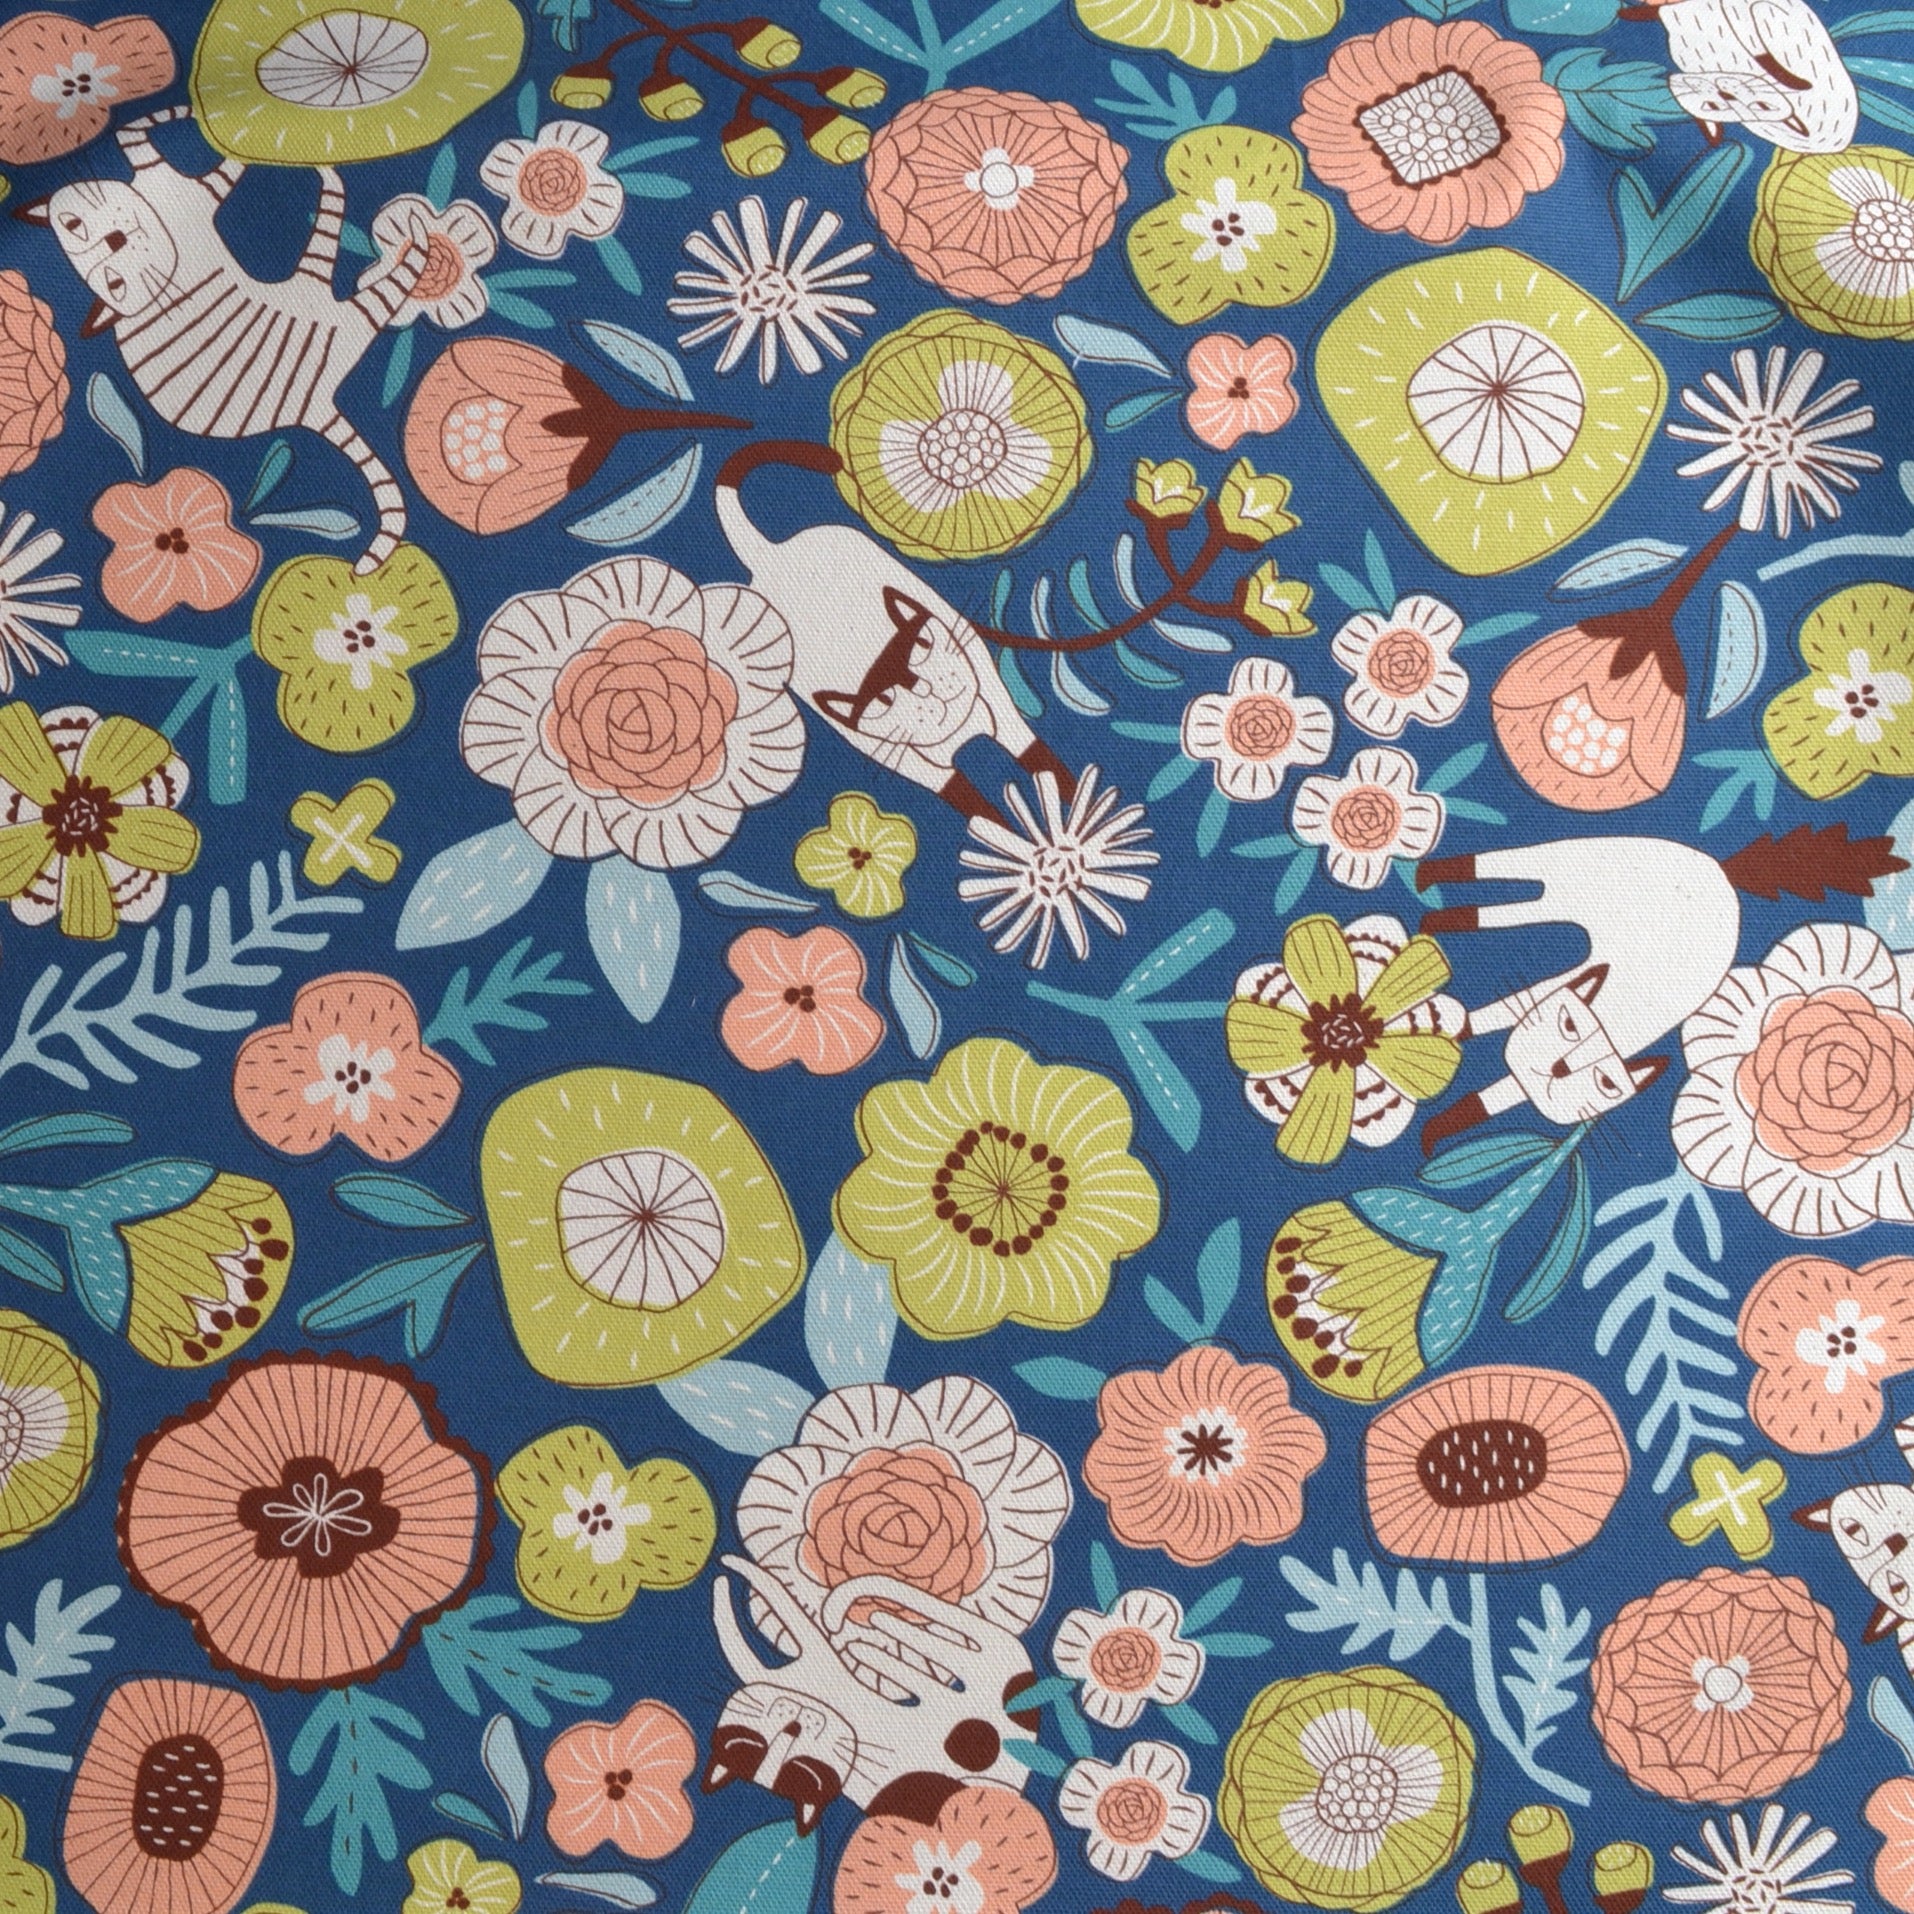 Stylised Cats & Flowers on Cotton Fabric